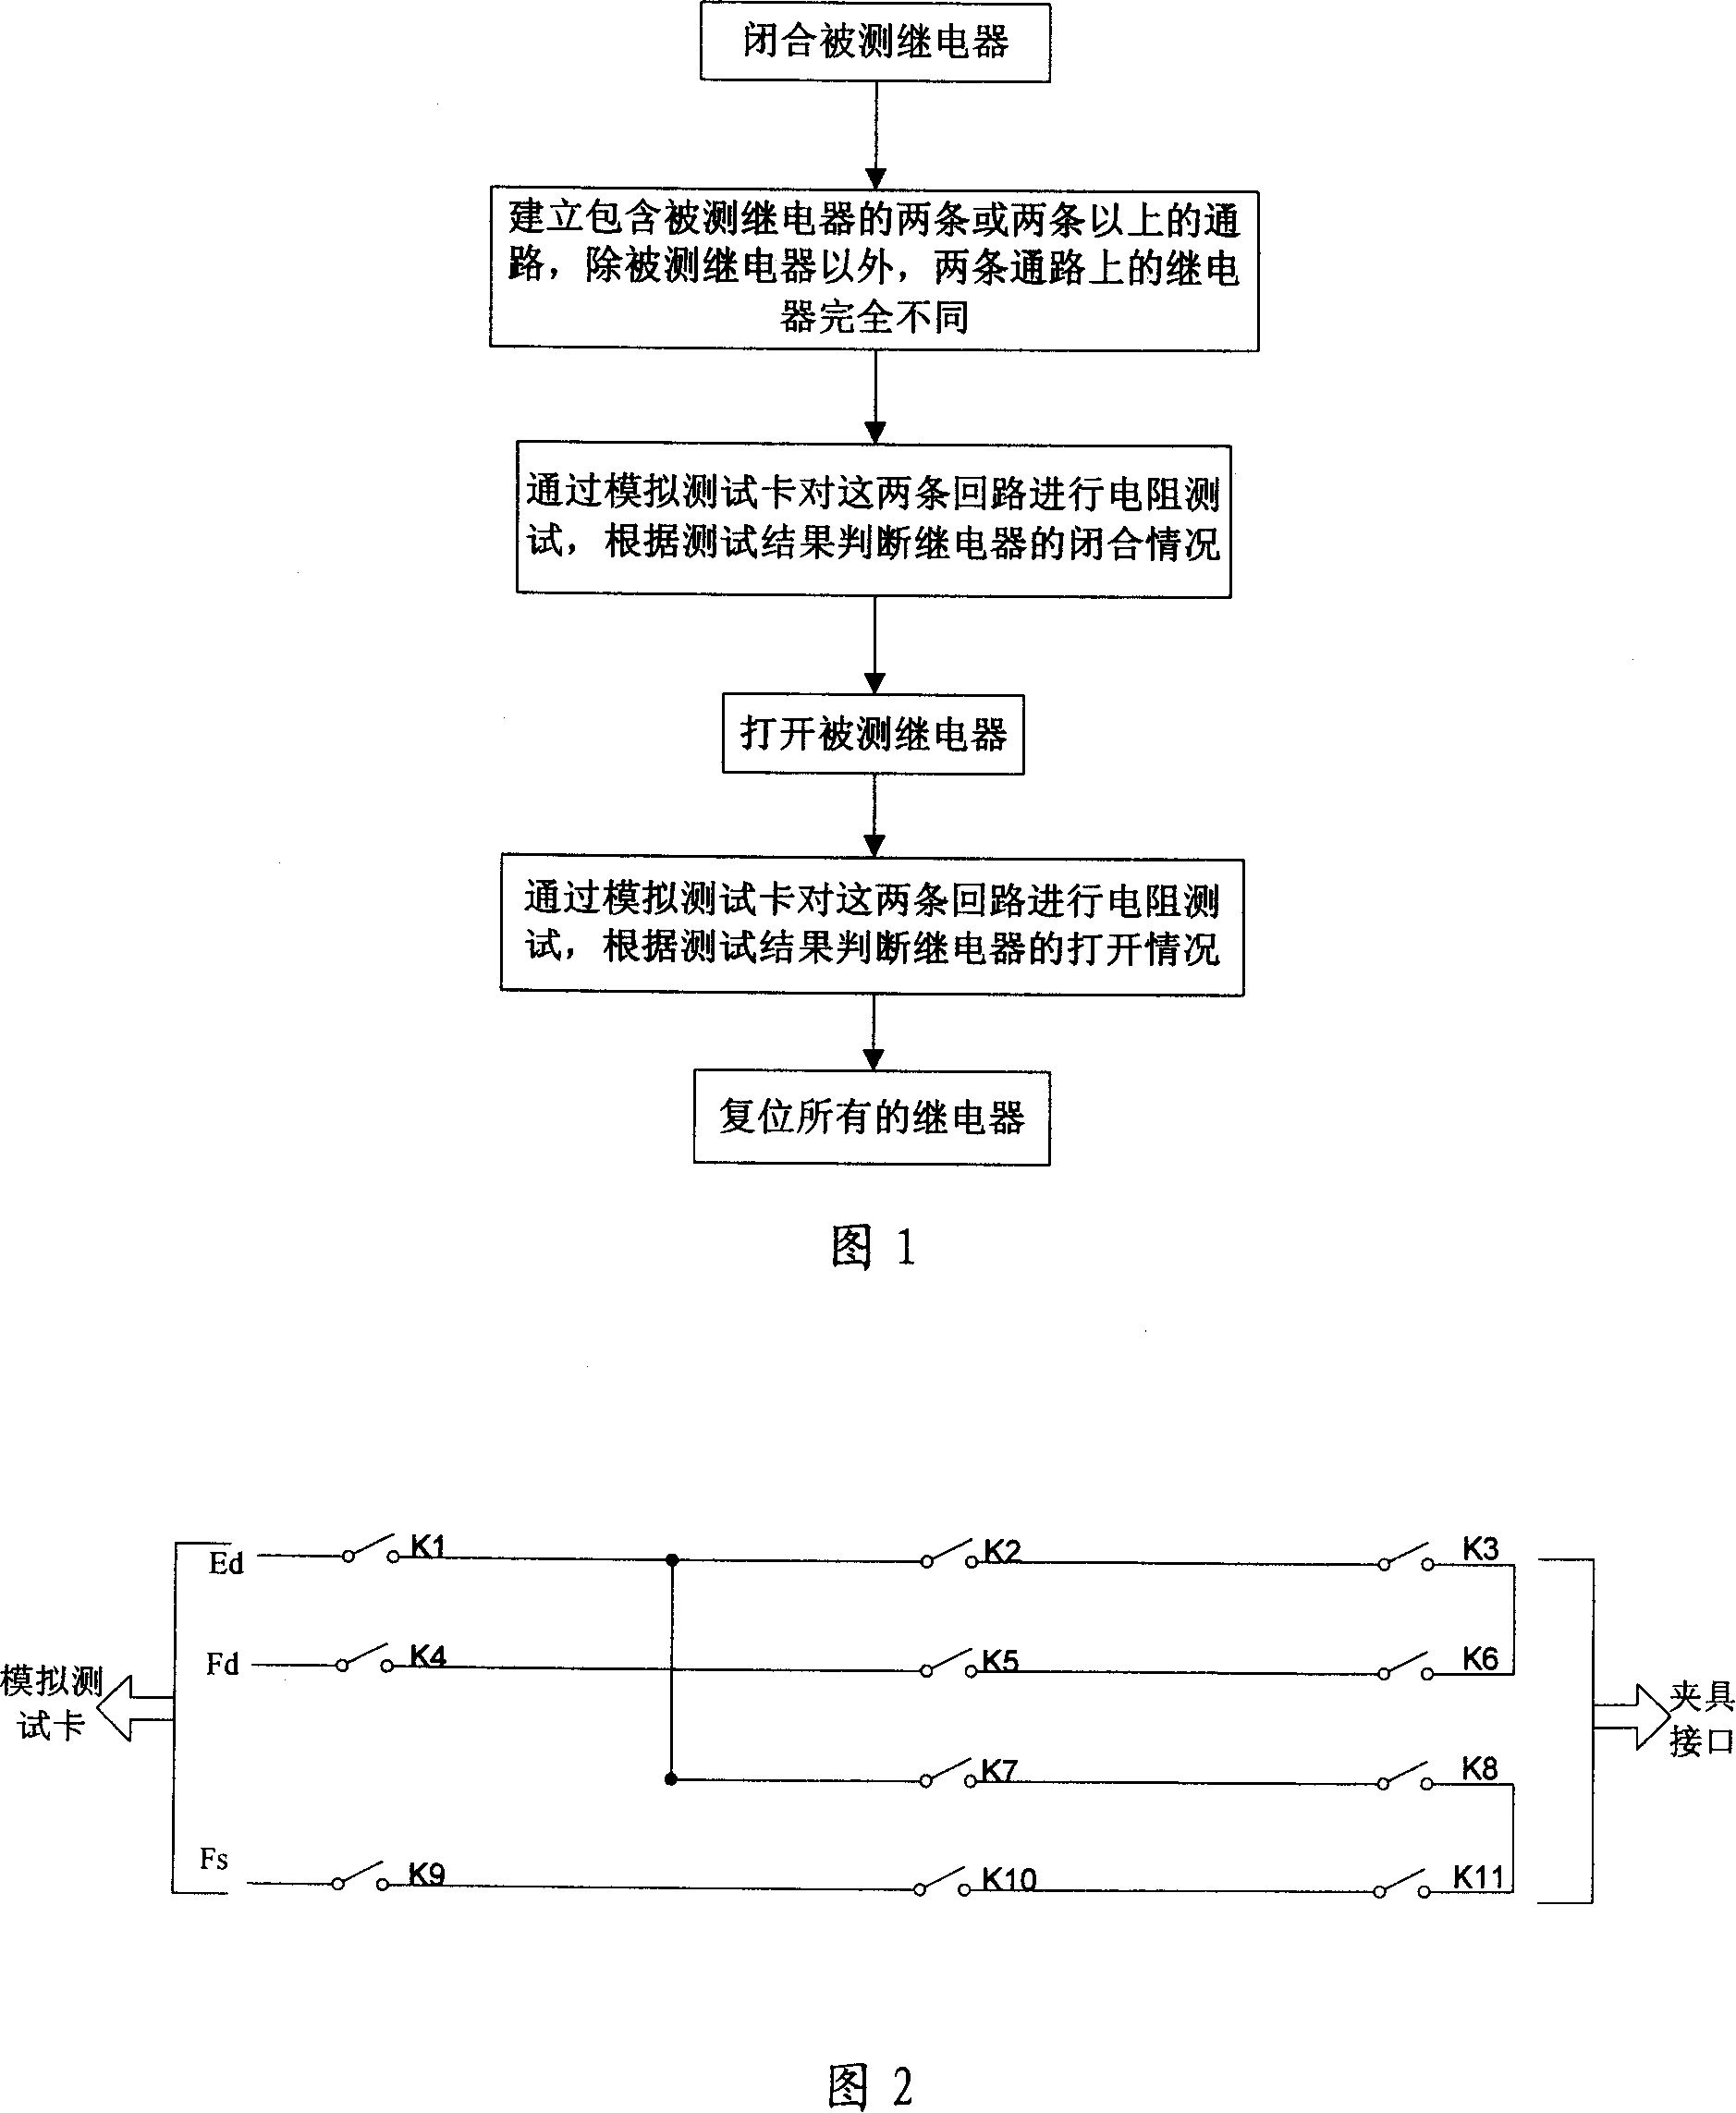 Relay test method for on-line testing instrument